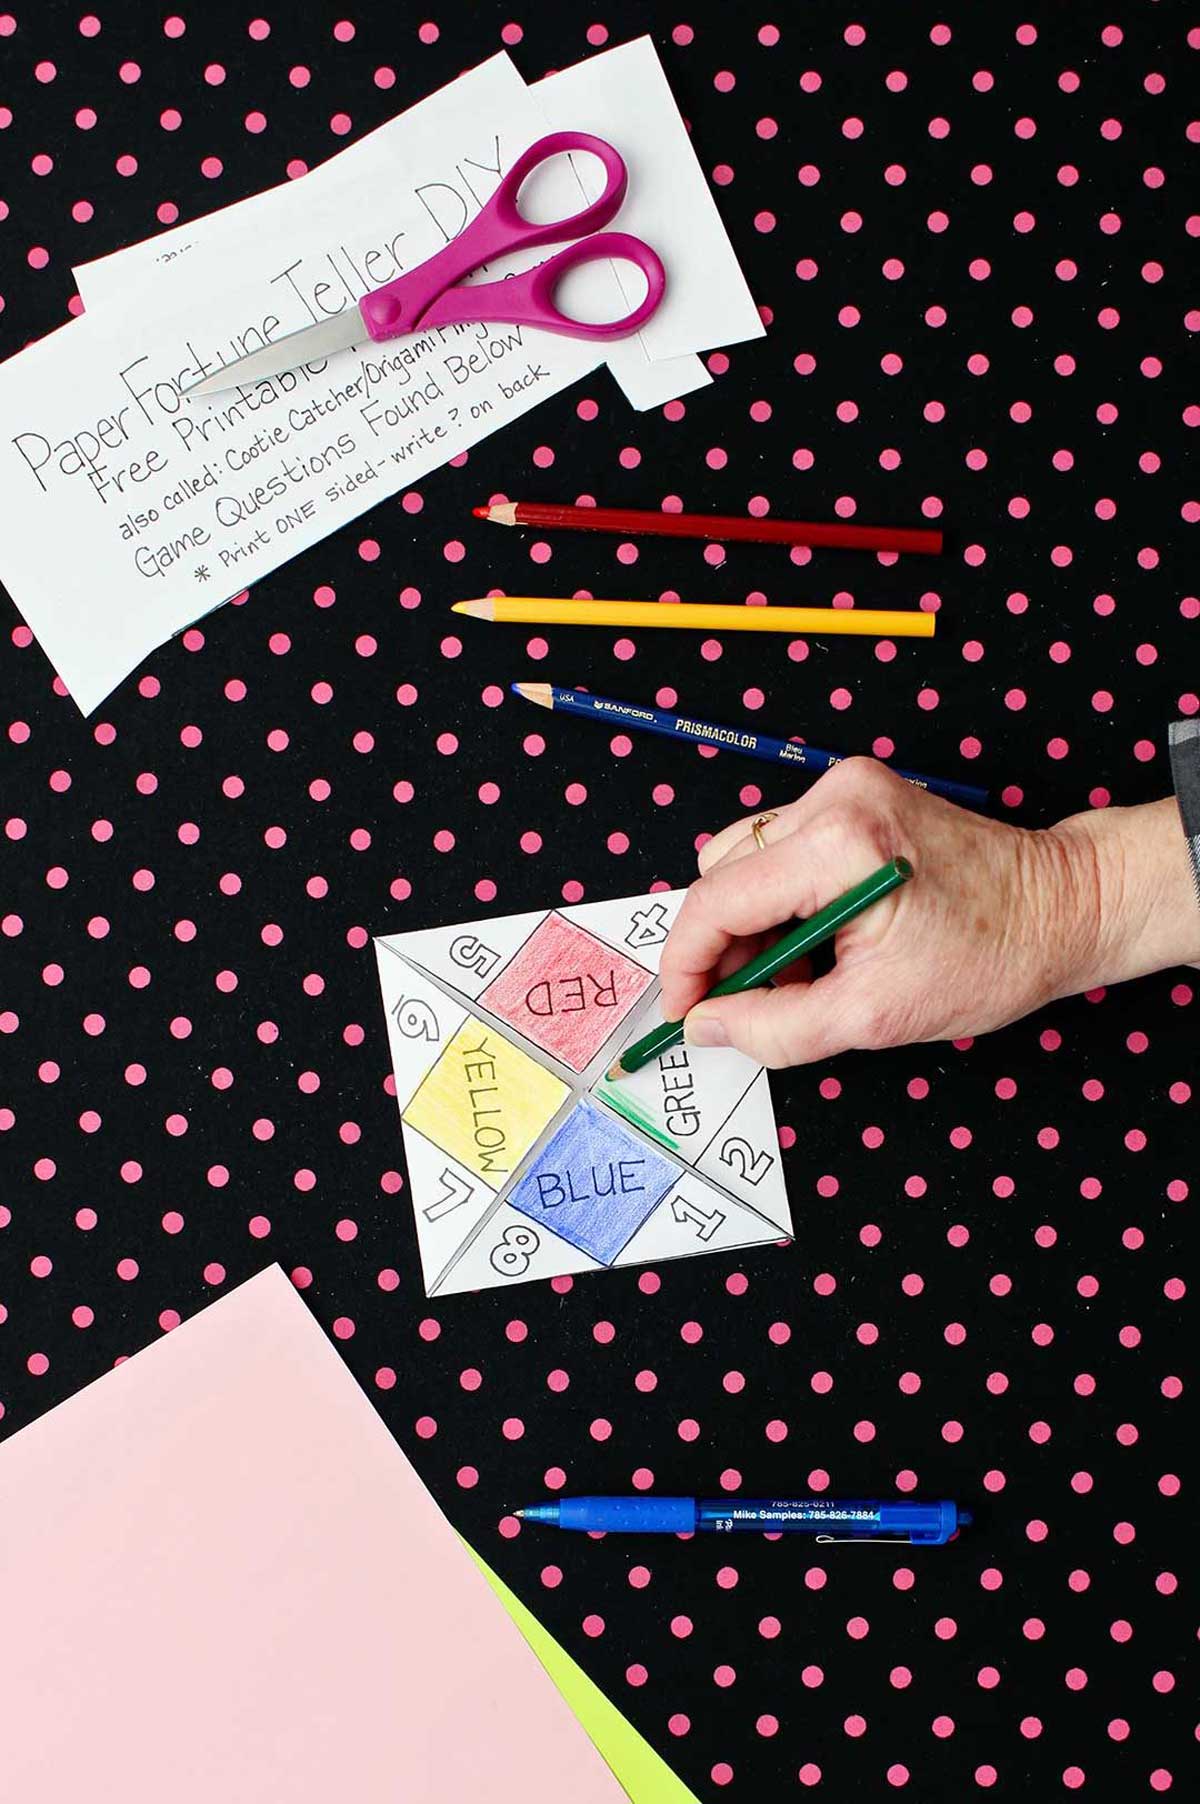 Hand coloring green tab green on printout of paper fortune teller with paper, scissors and colored pencils resting on black and pink polka dotted background.